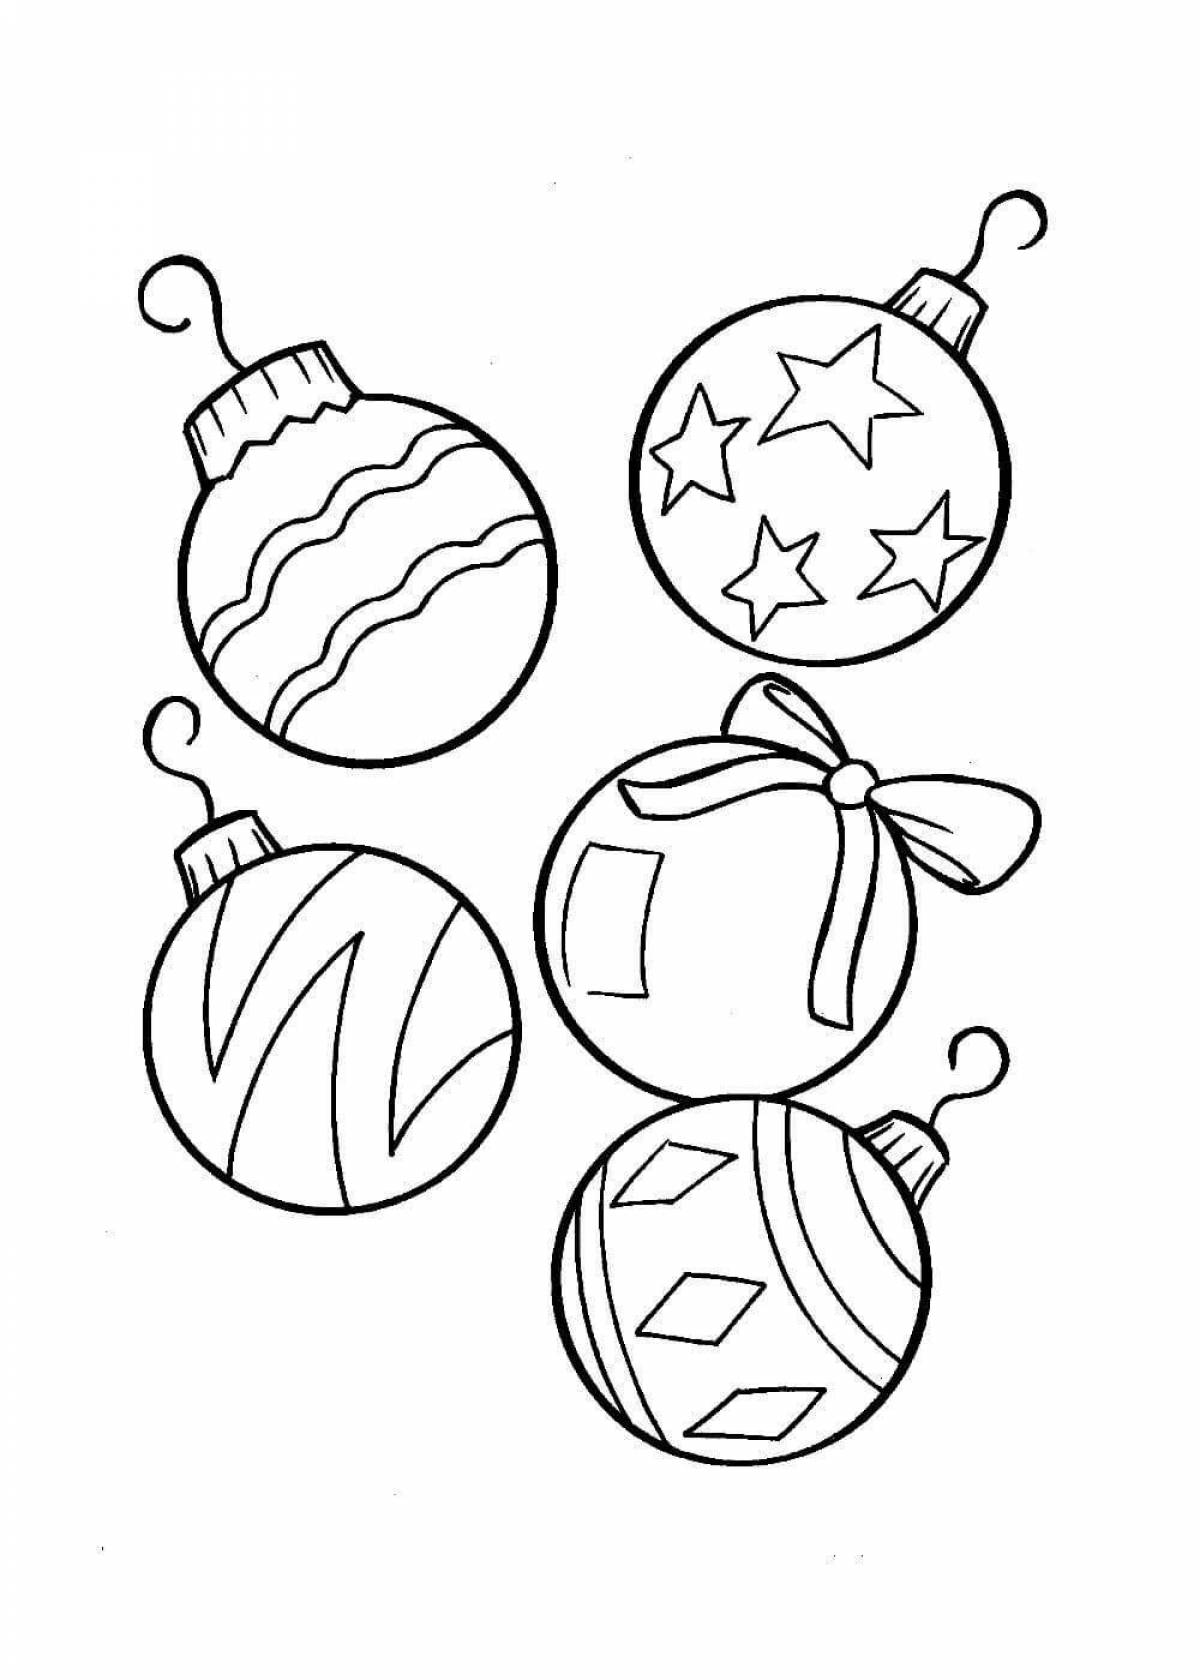 Merry Christmas ball coloring for kids